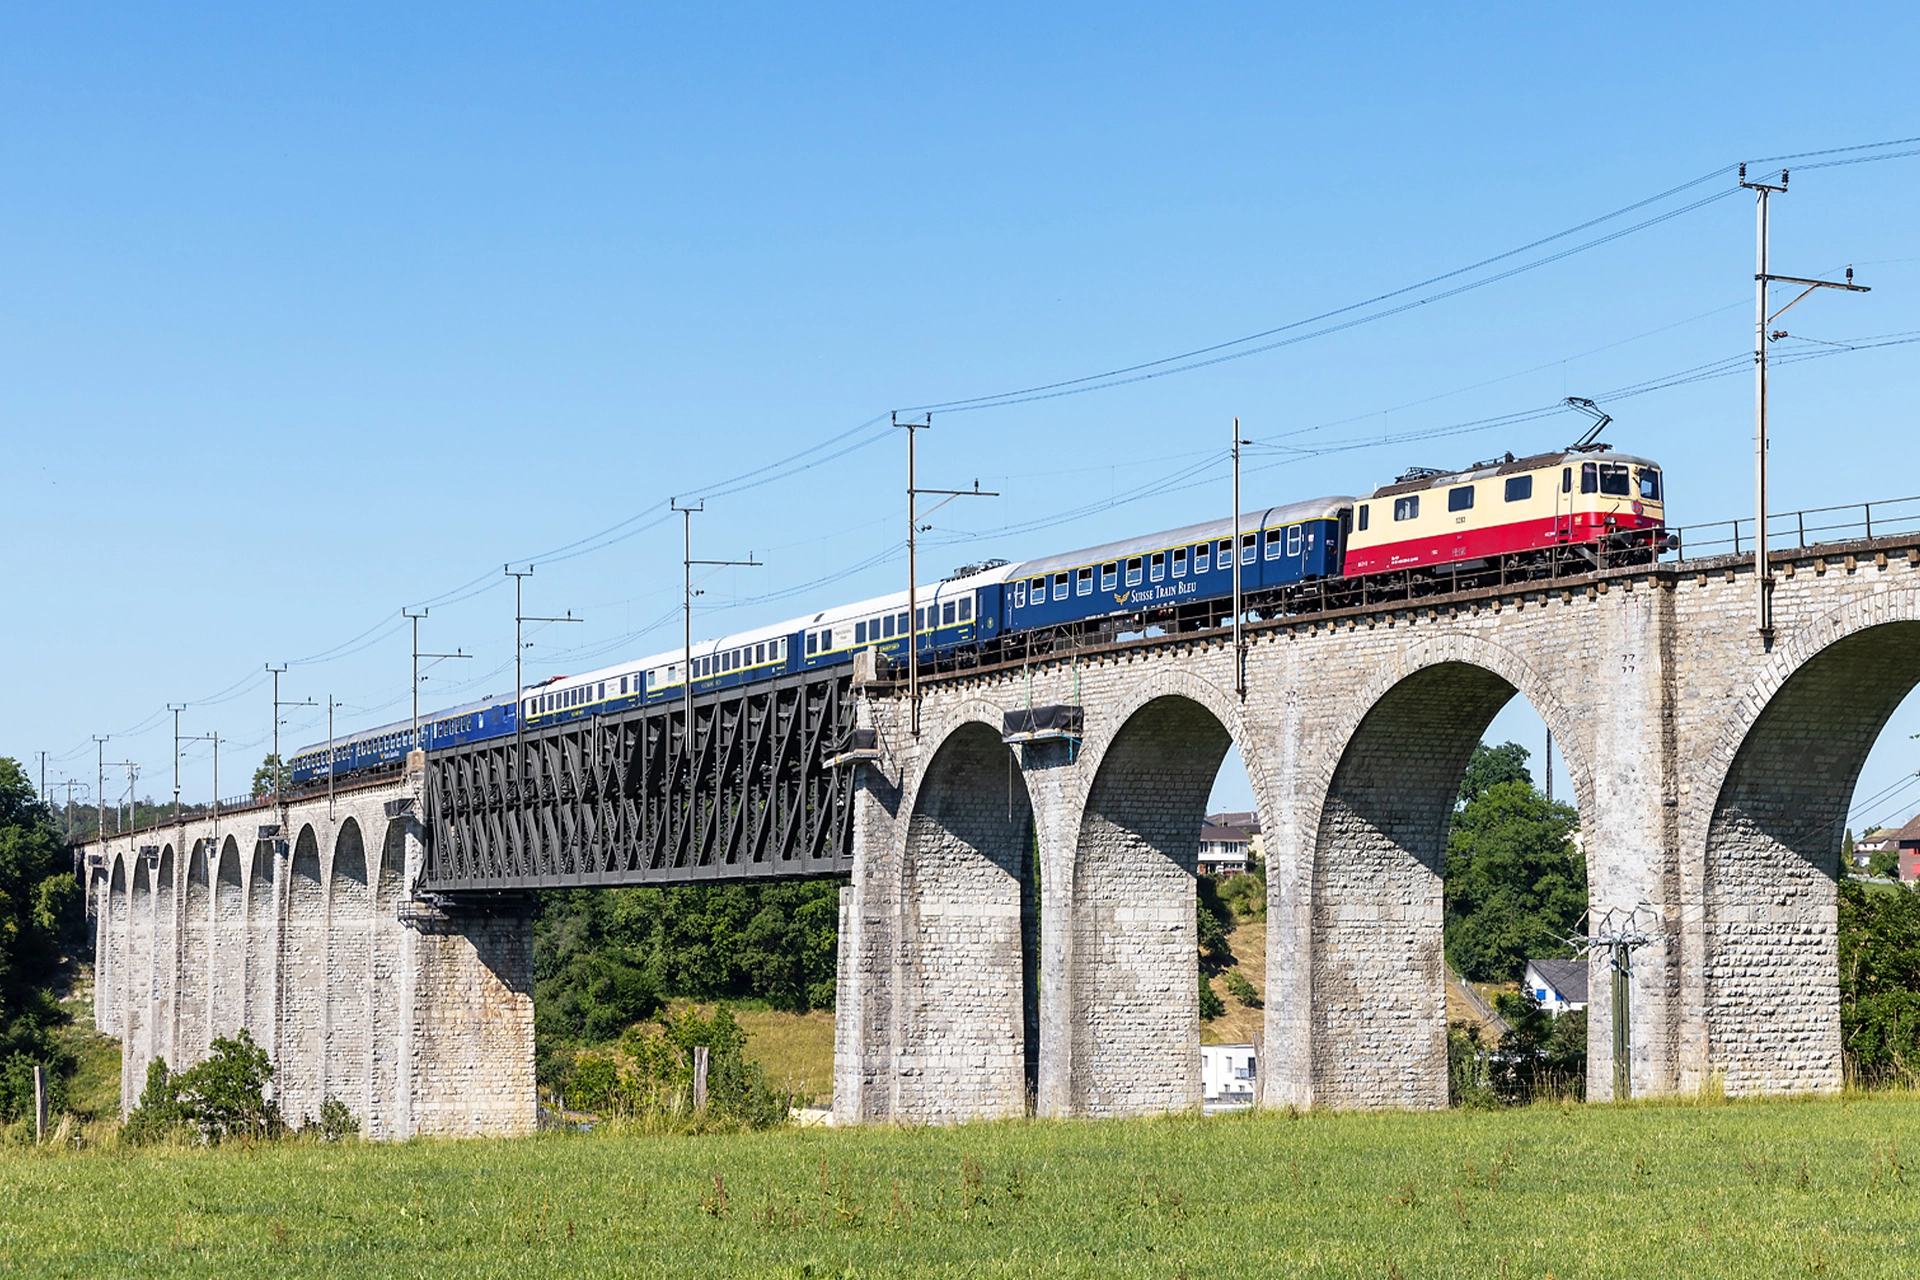 Journey of discovery with the “Suisse Train Bleu” through Austria